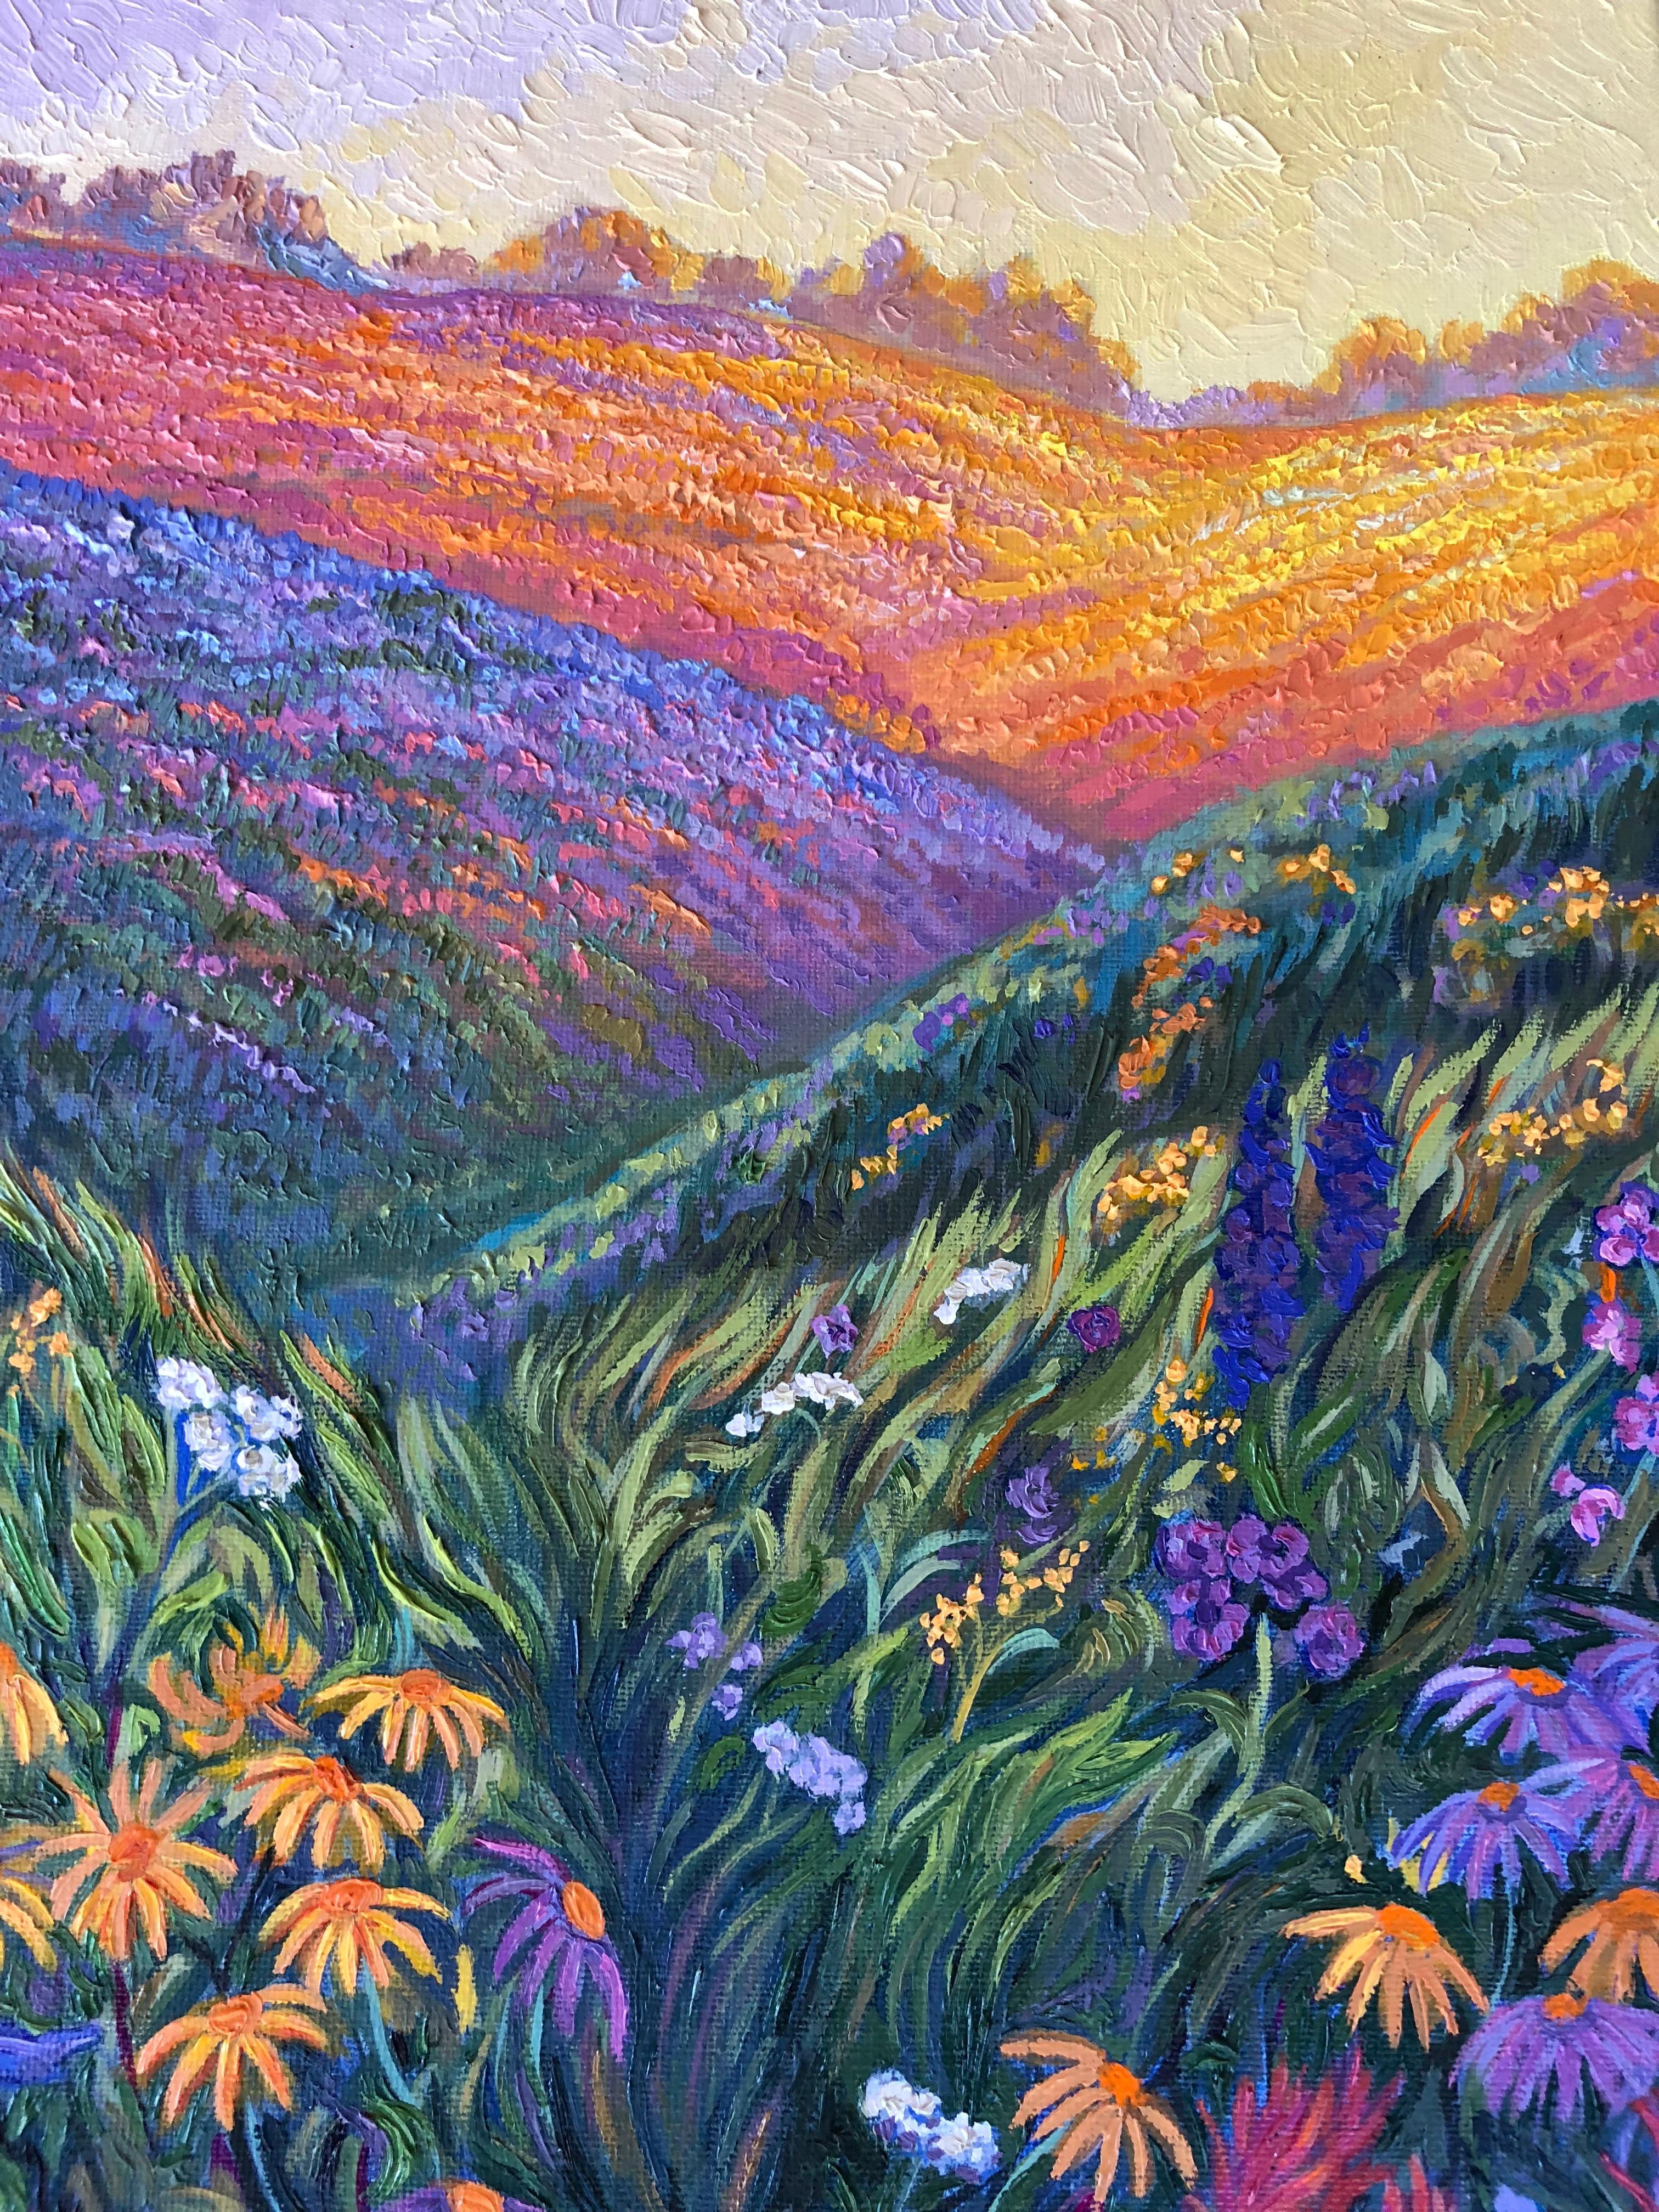 Wildflower Valley - Painting by Anna Widmer